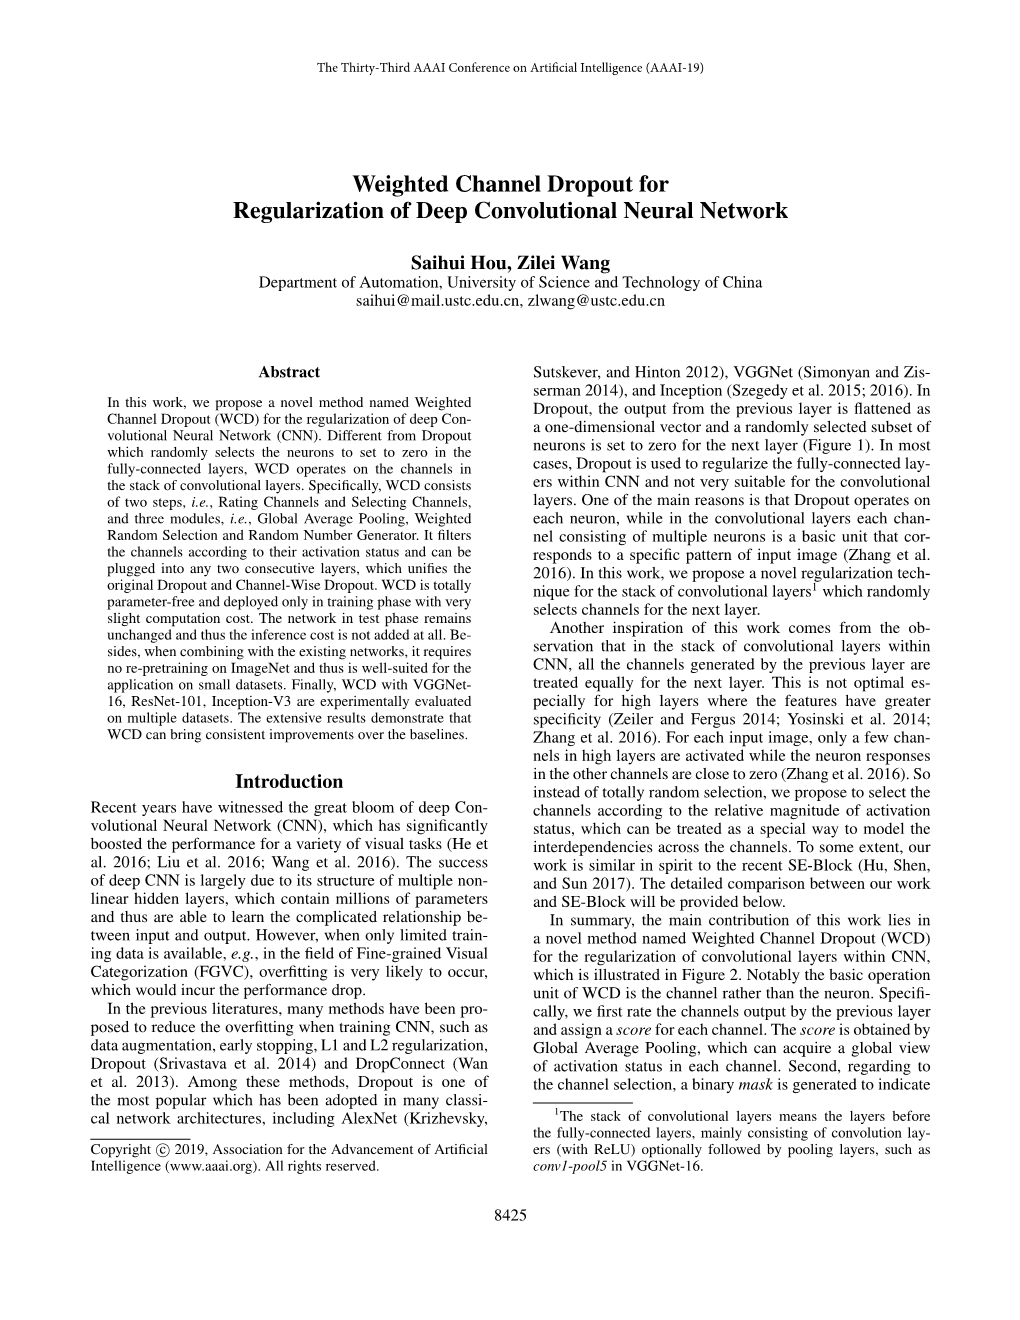 Weighted Channel Dropout for Regularization of Deep Convolutional Neural Network